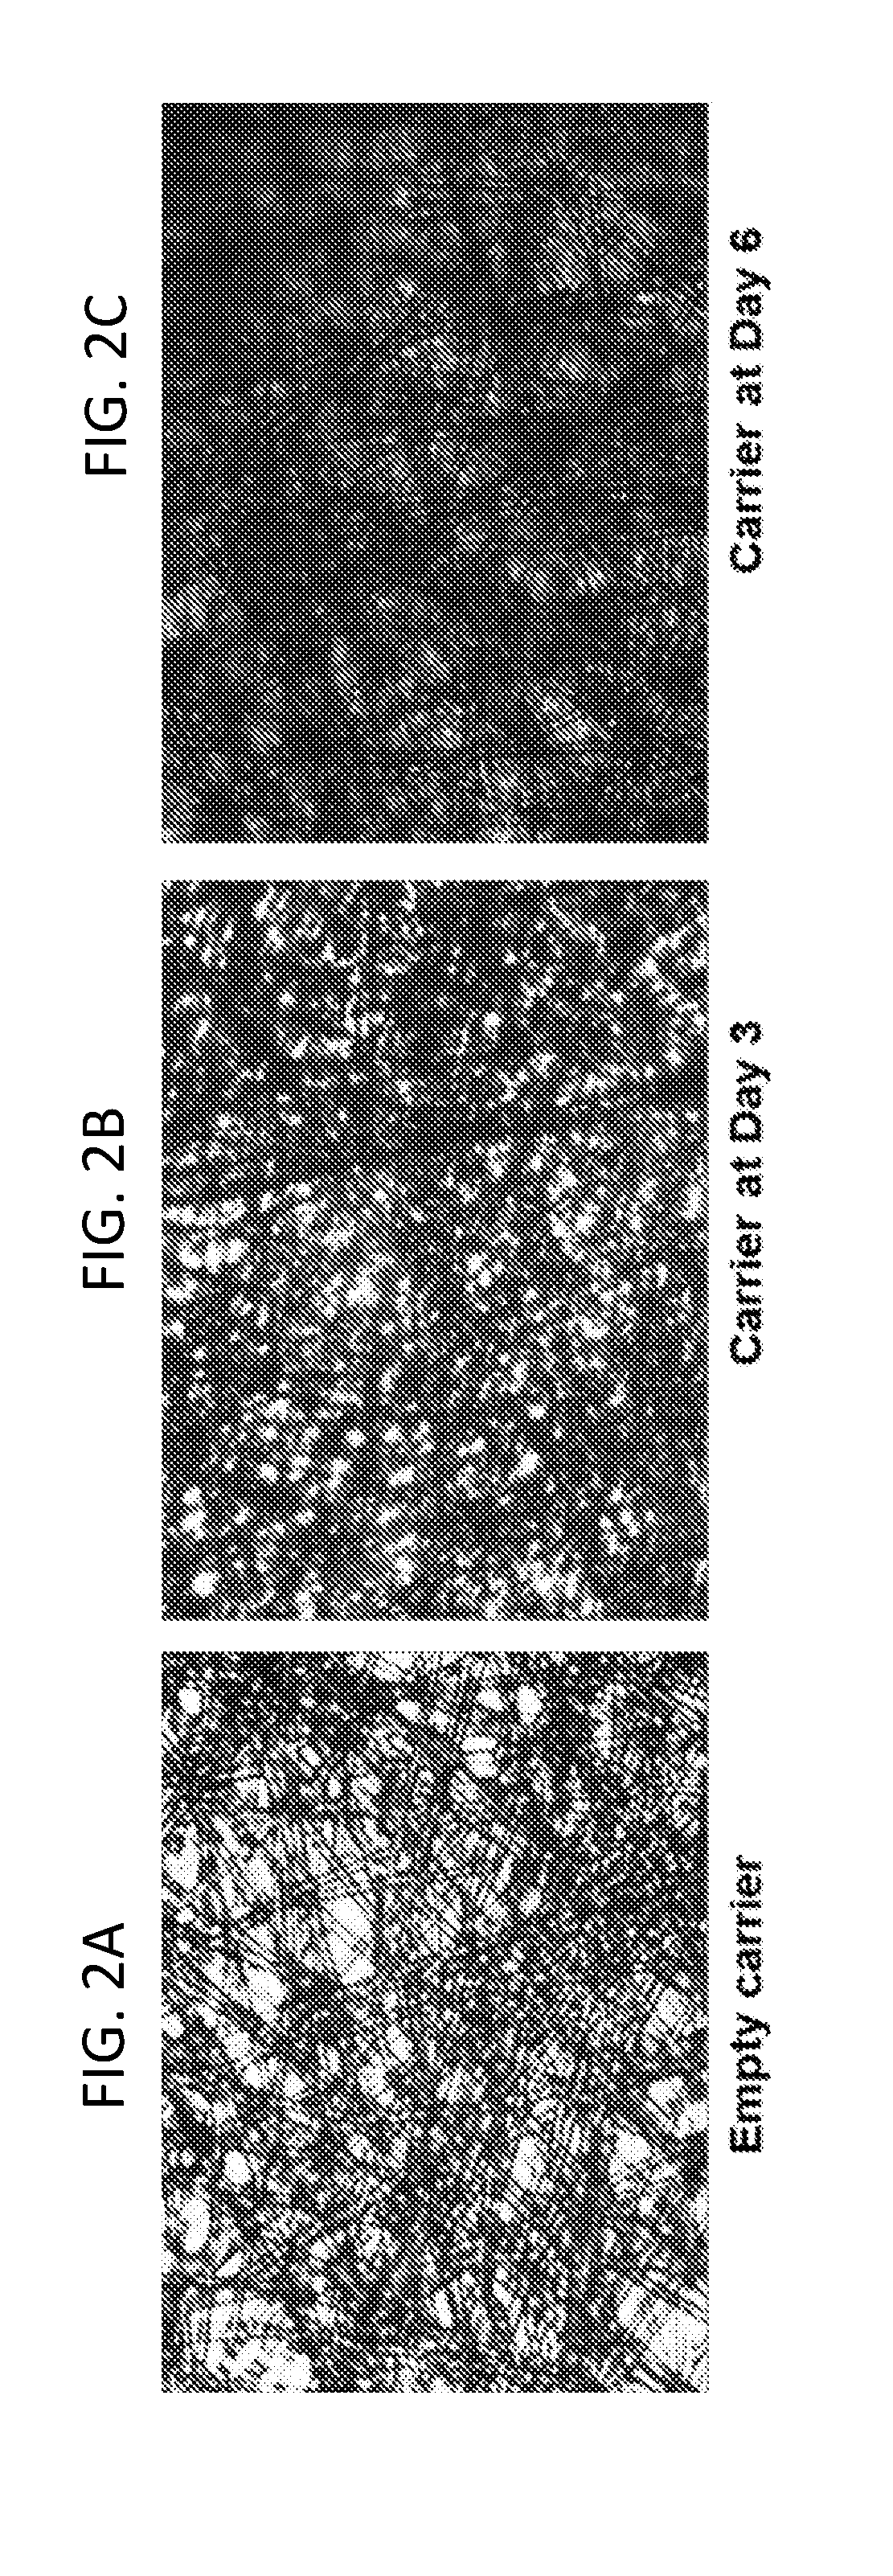 Methods for producing virus for vaccine production